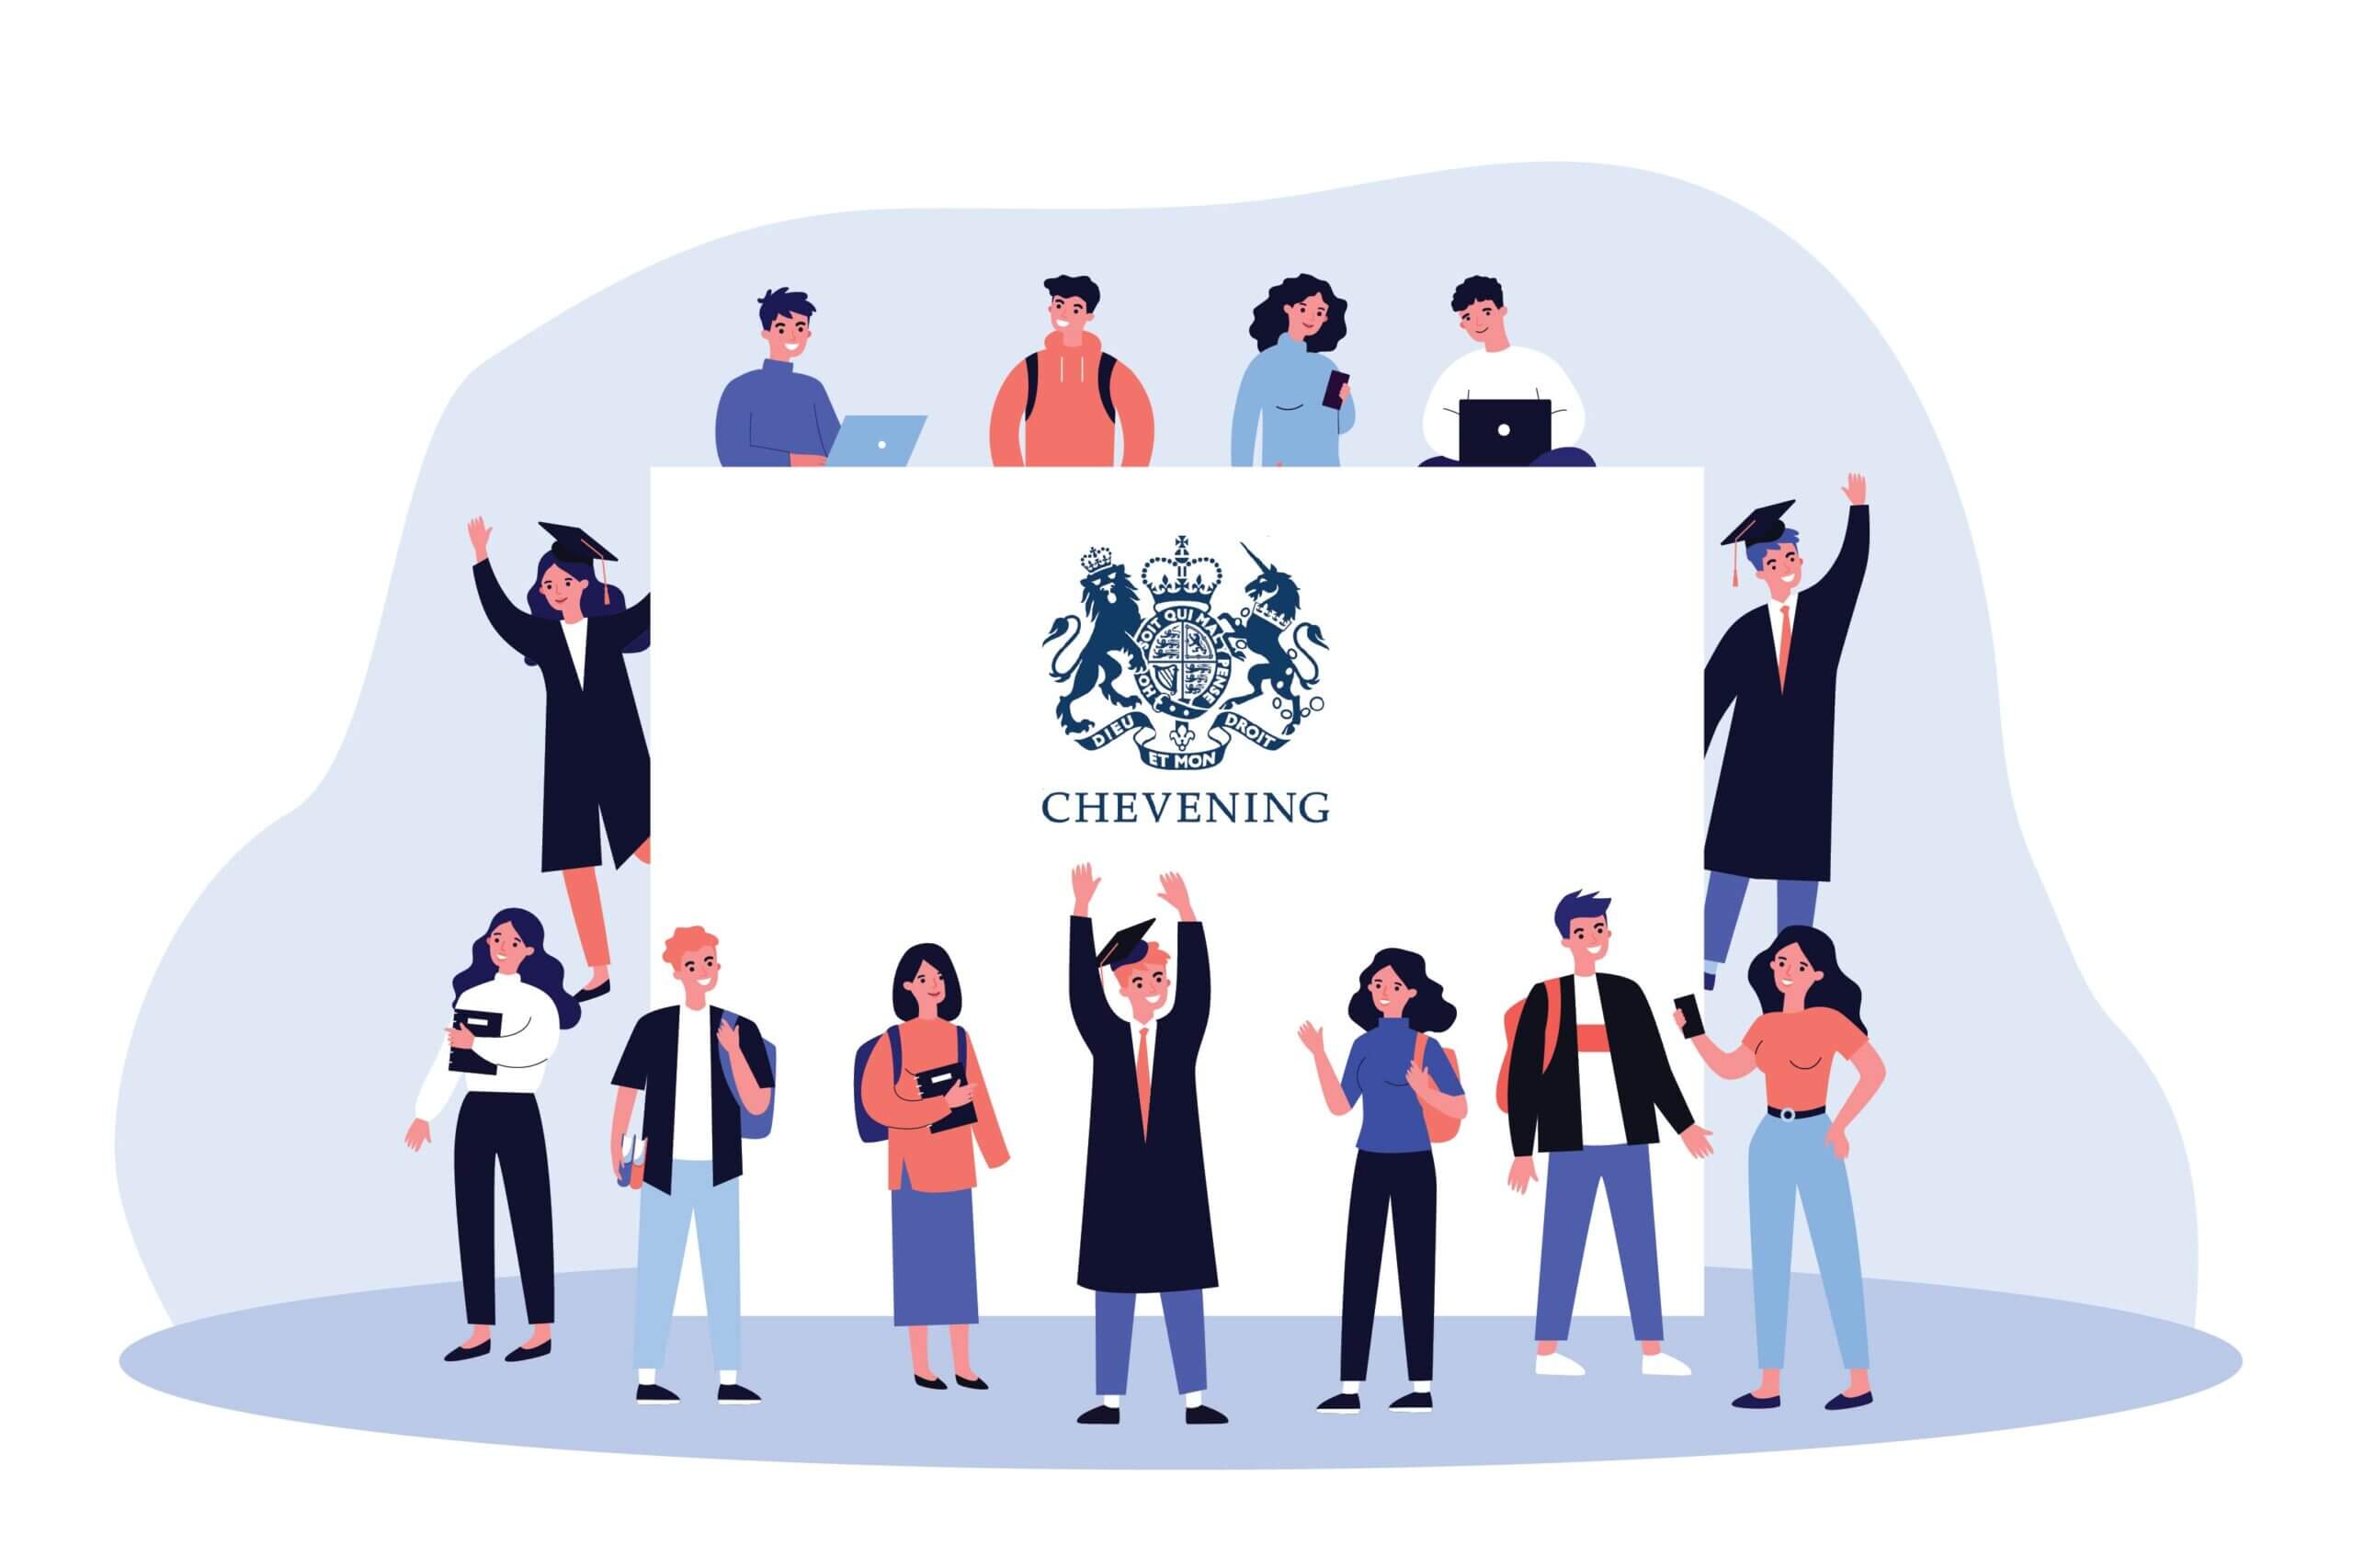 CHEVENING APPLICATIONS ARE OPEN!